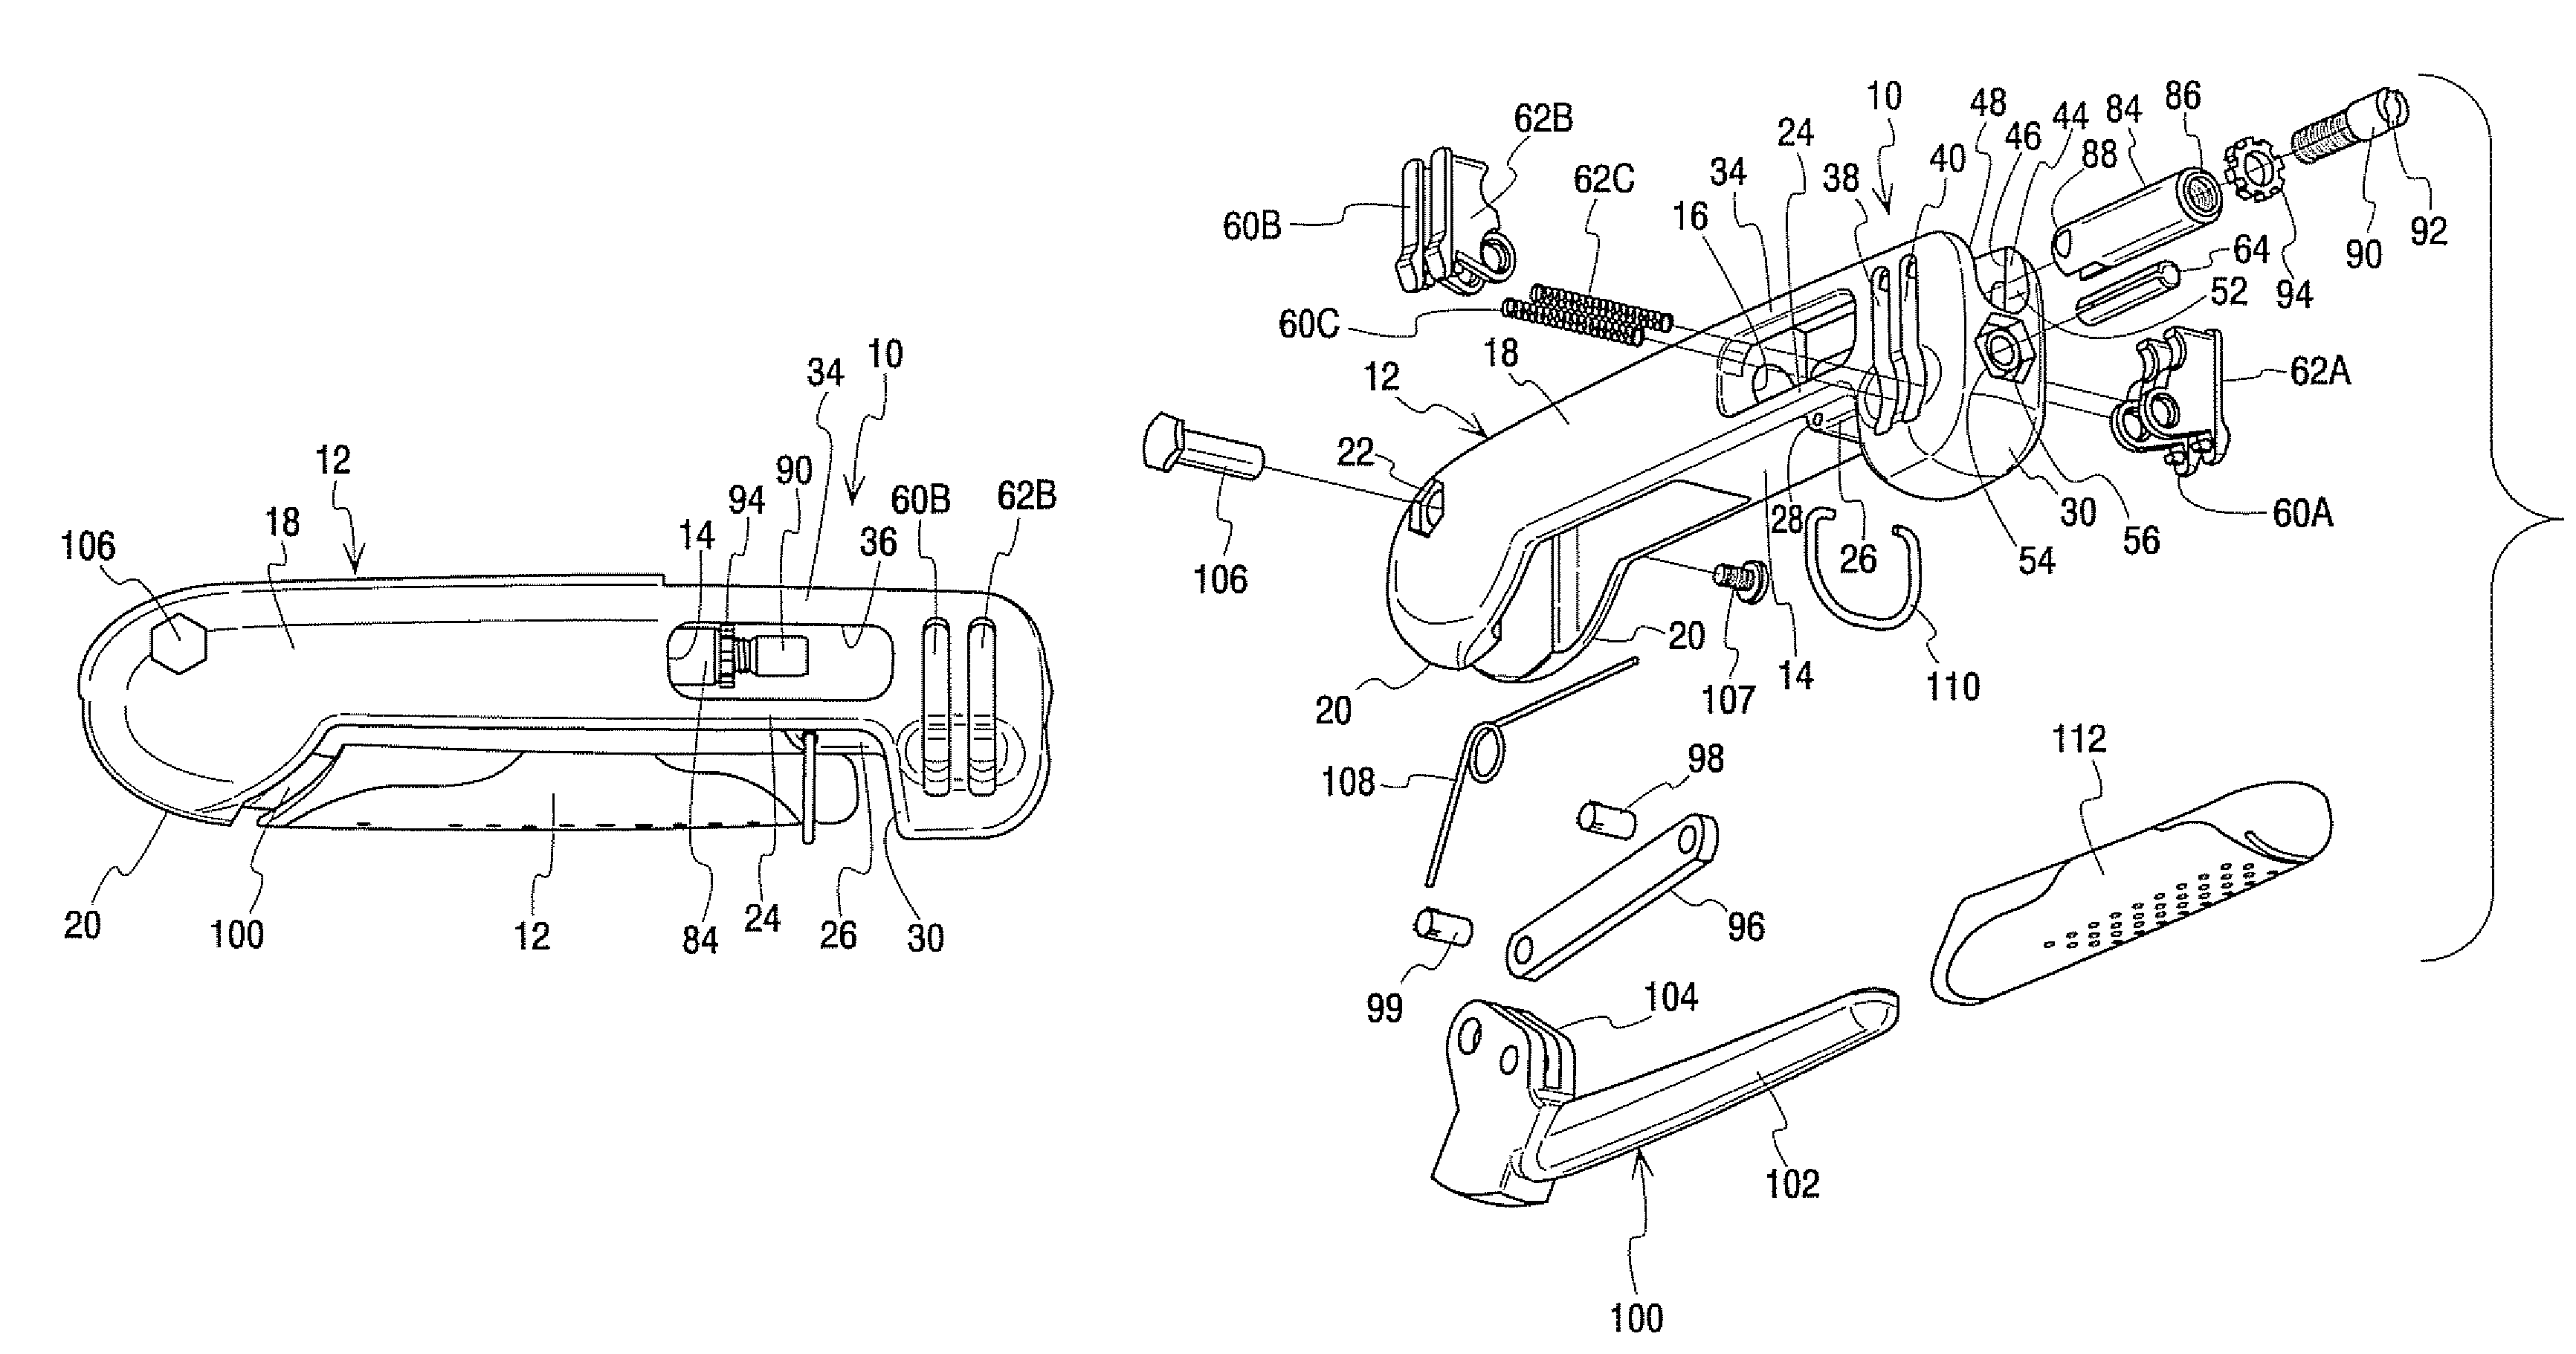 Application tool for coaxial cable compression connectors